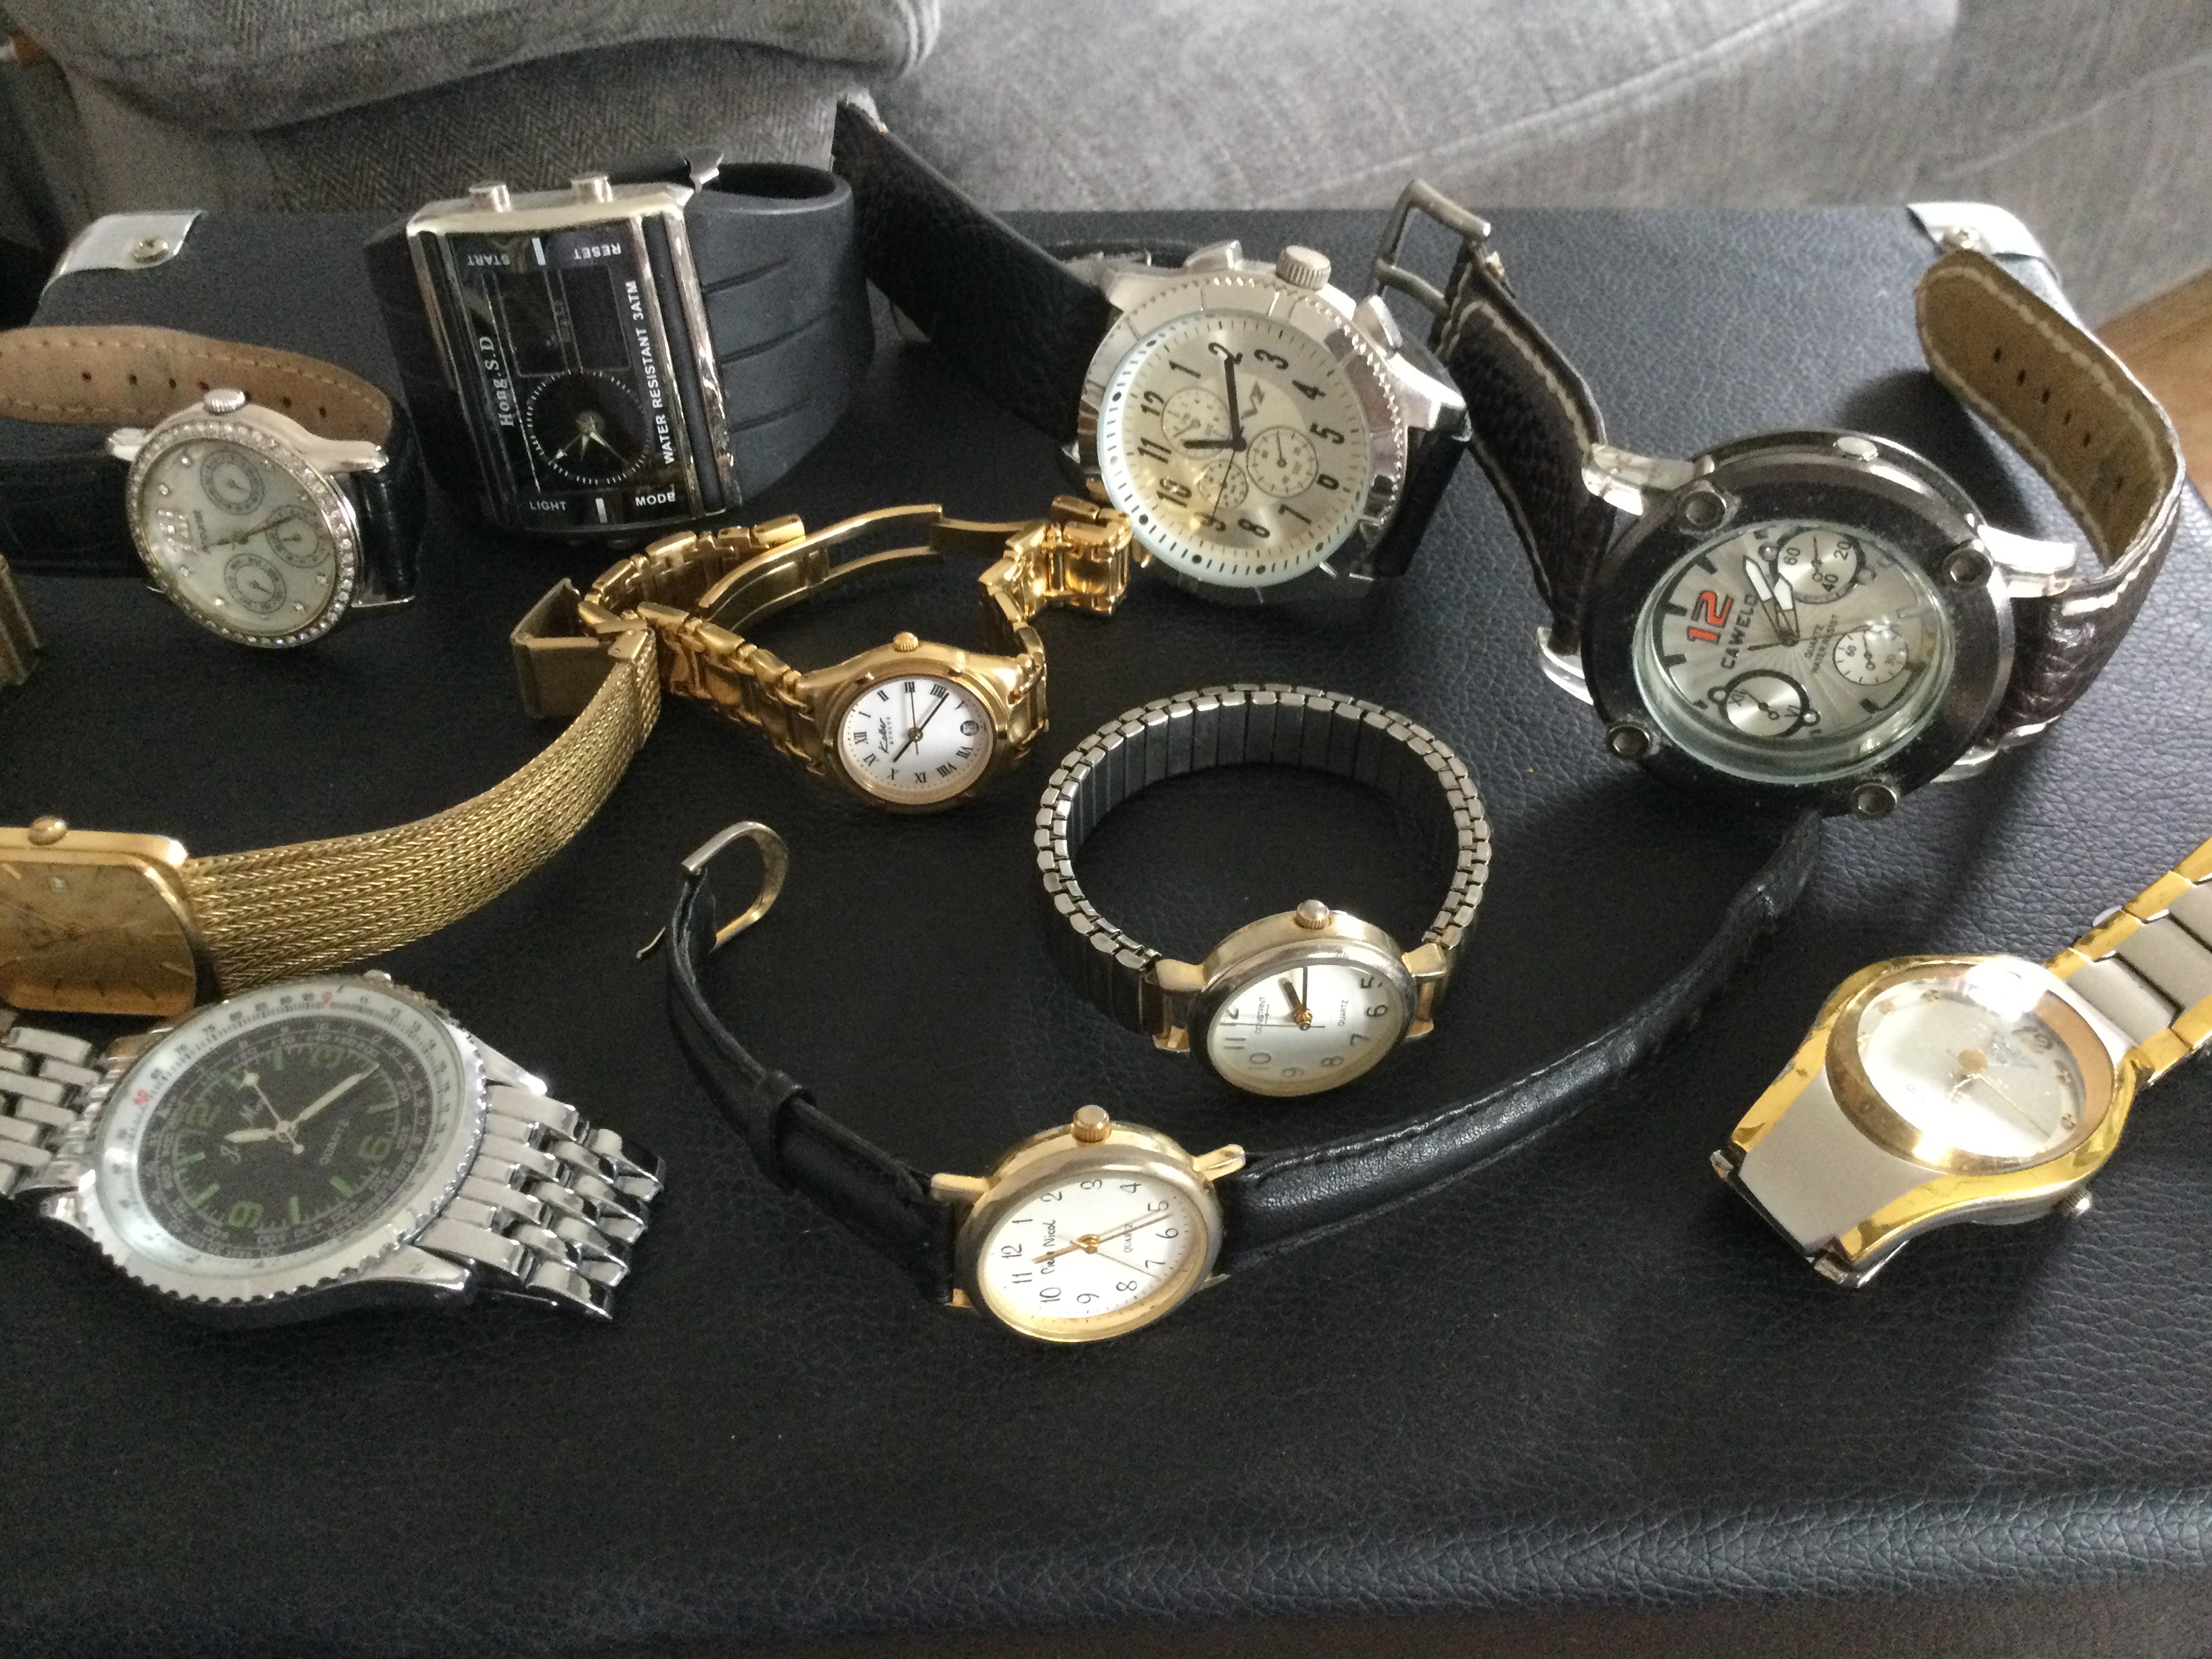 Collection of 10 Ladies & Gents Wristwatches, Accurist, Constant Etc (GS 19) A really nice